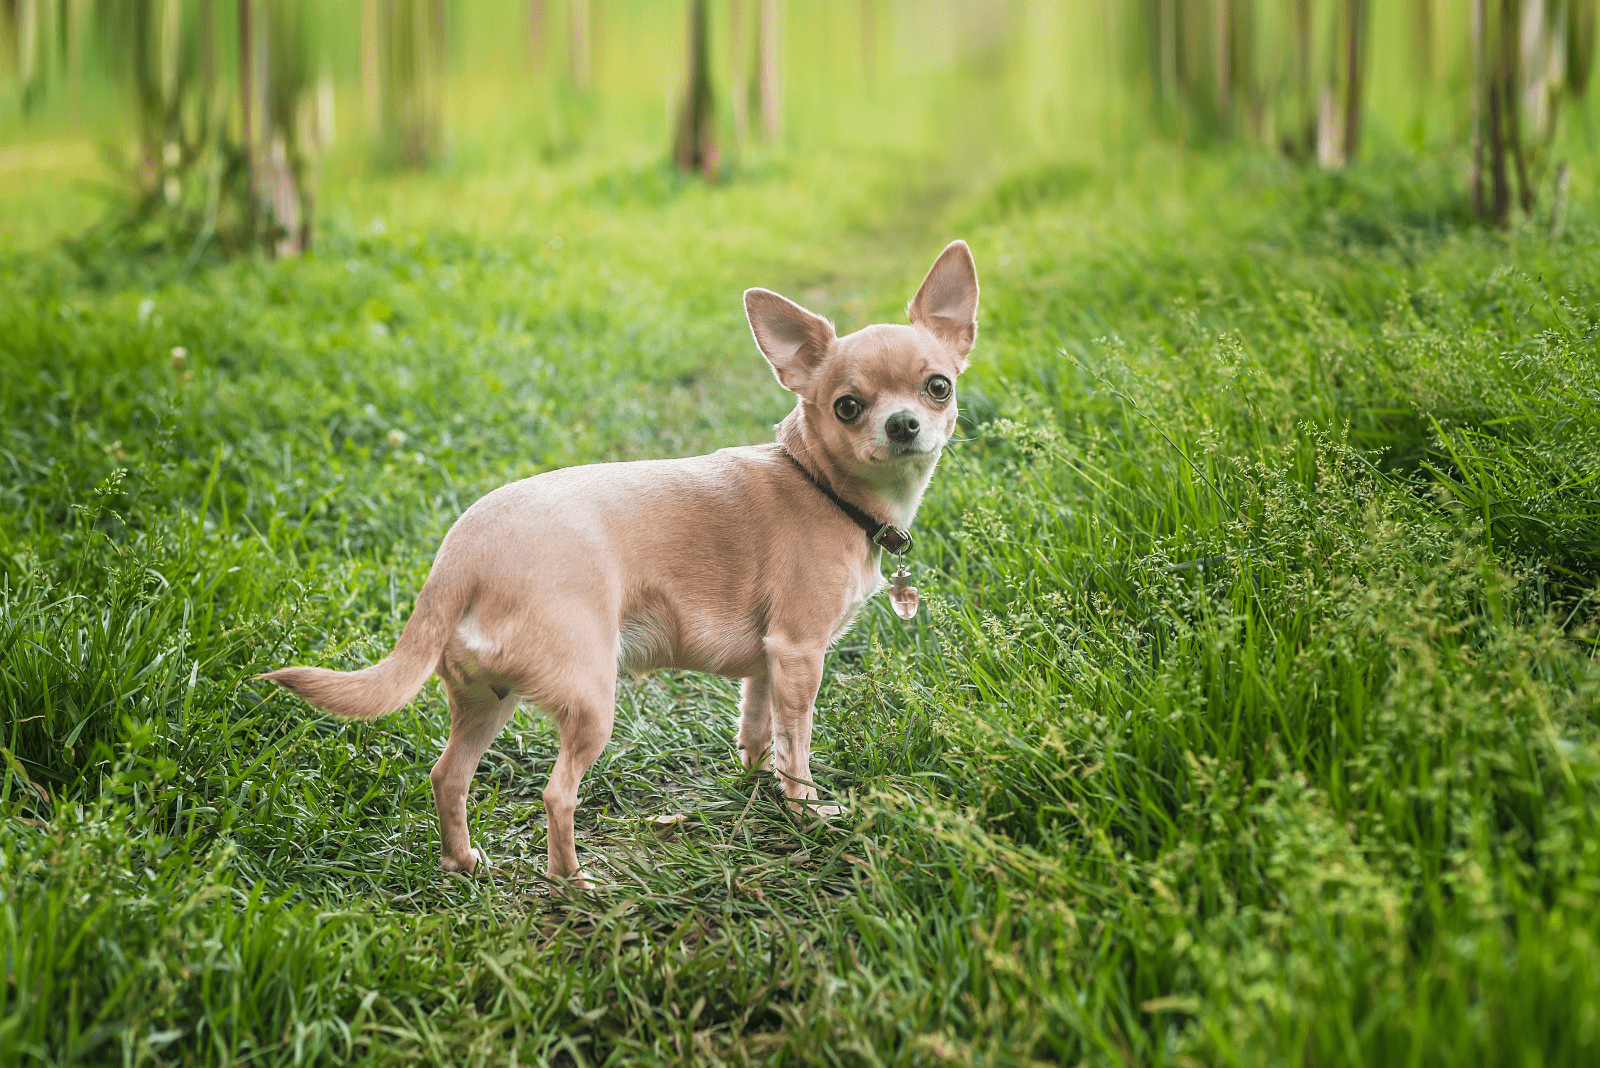 Chihuahua sets in the field